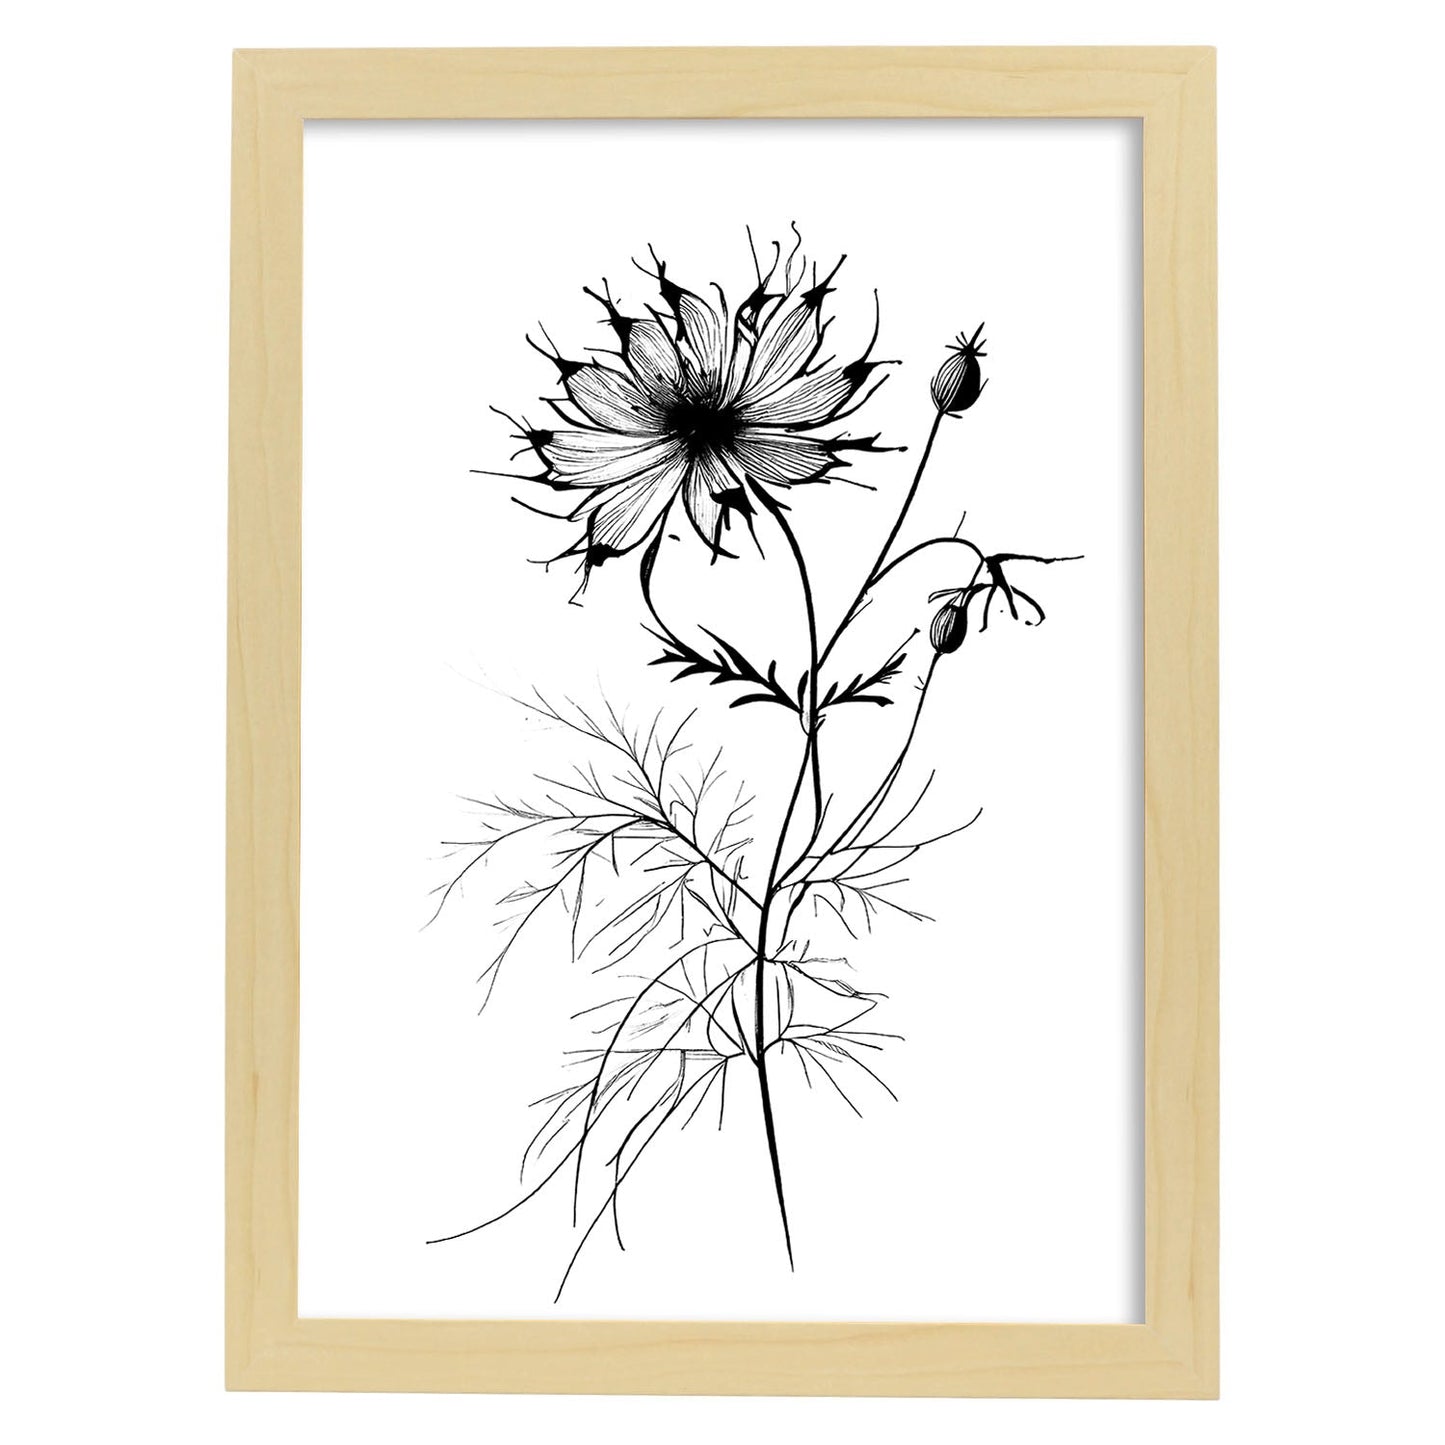 Nacnic Love-in-a-Mist Minimalist Line Art_2. Aesthetic Wall Art Prints for Bedroom or Living Room Design.